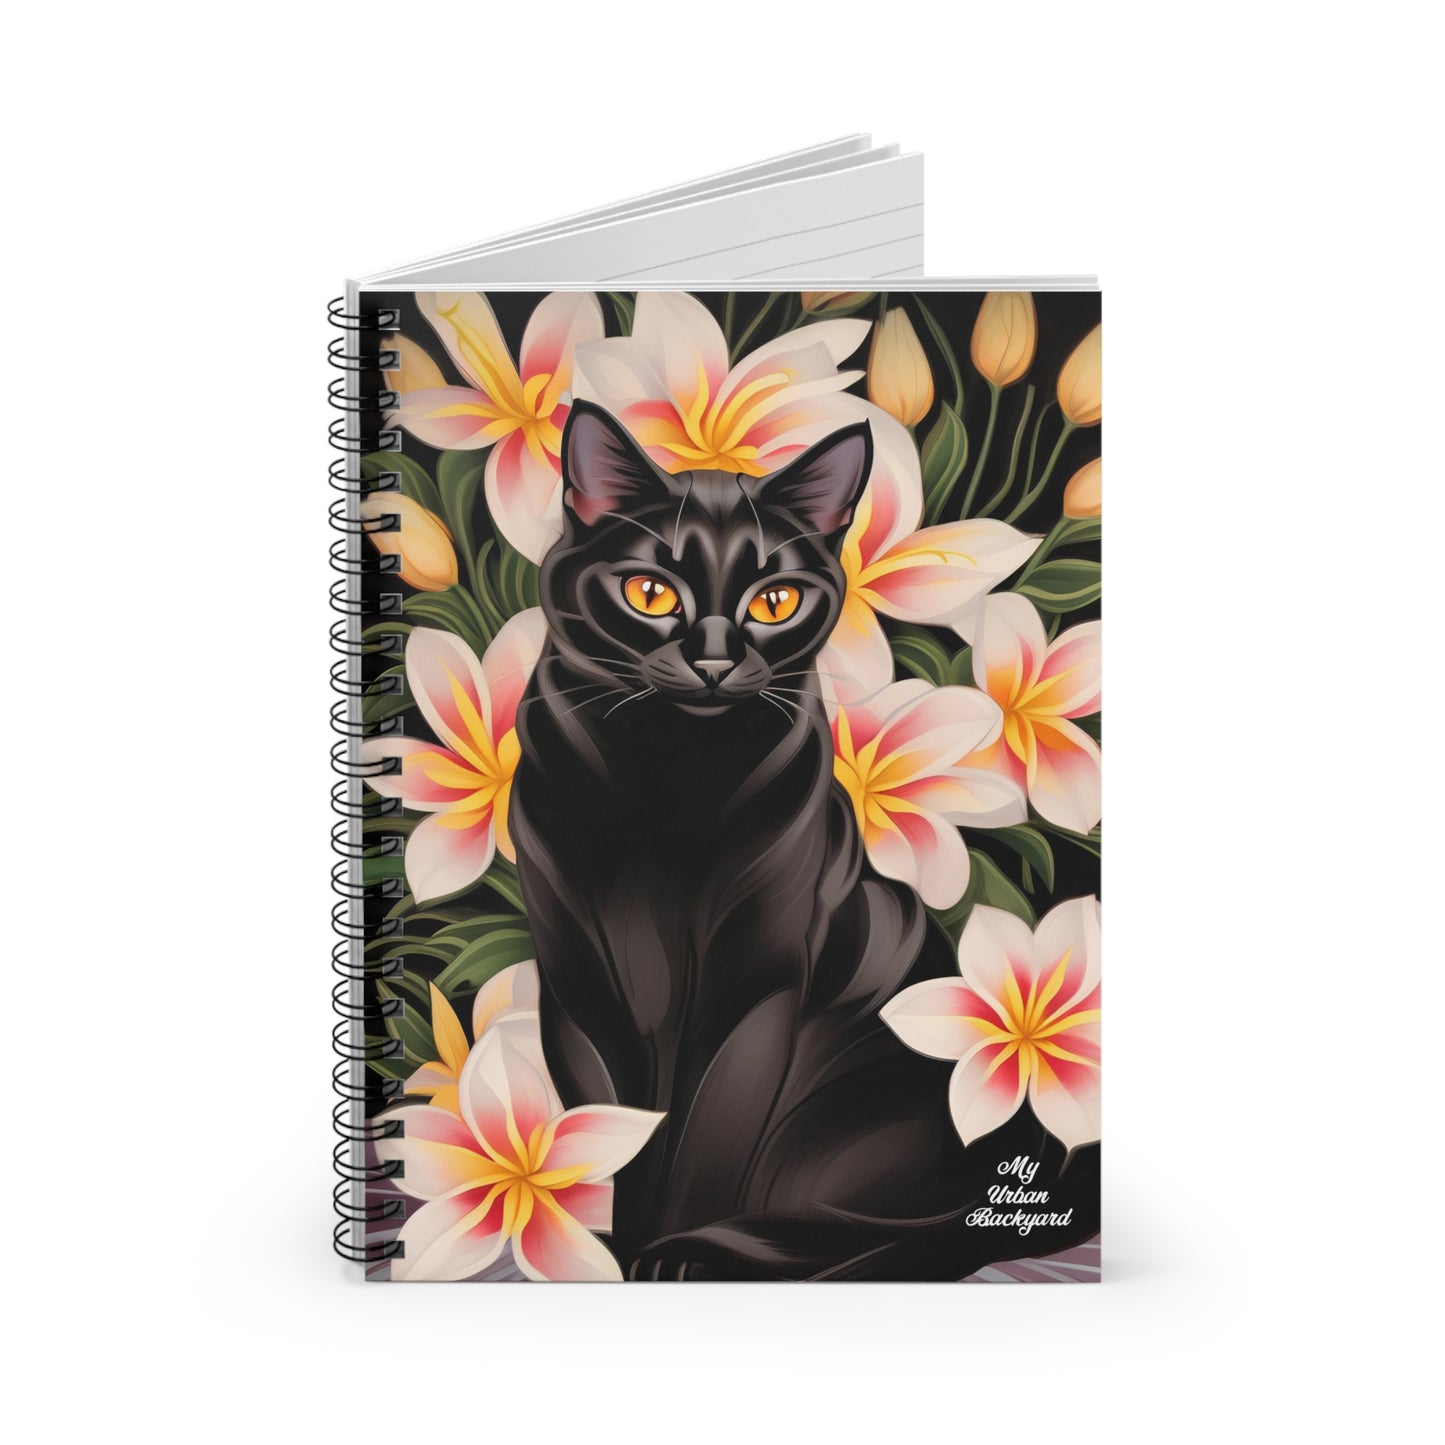 Silky Black Cat with Flowers, Spiral Notebook Journal - Write in Style